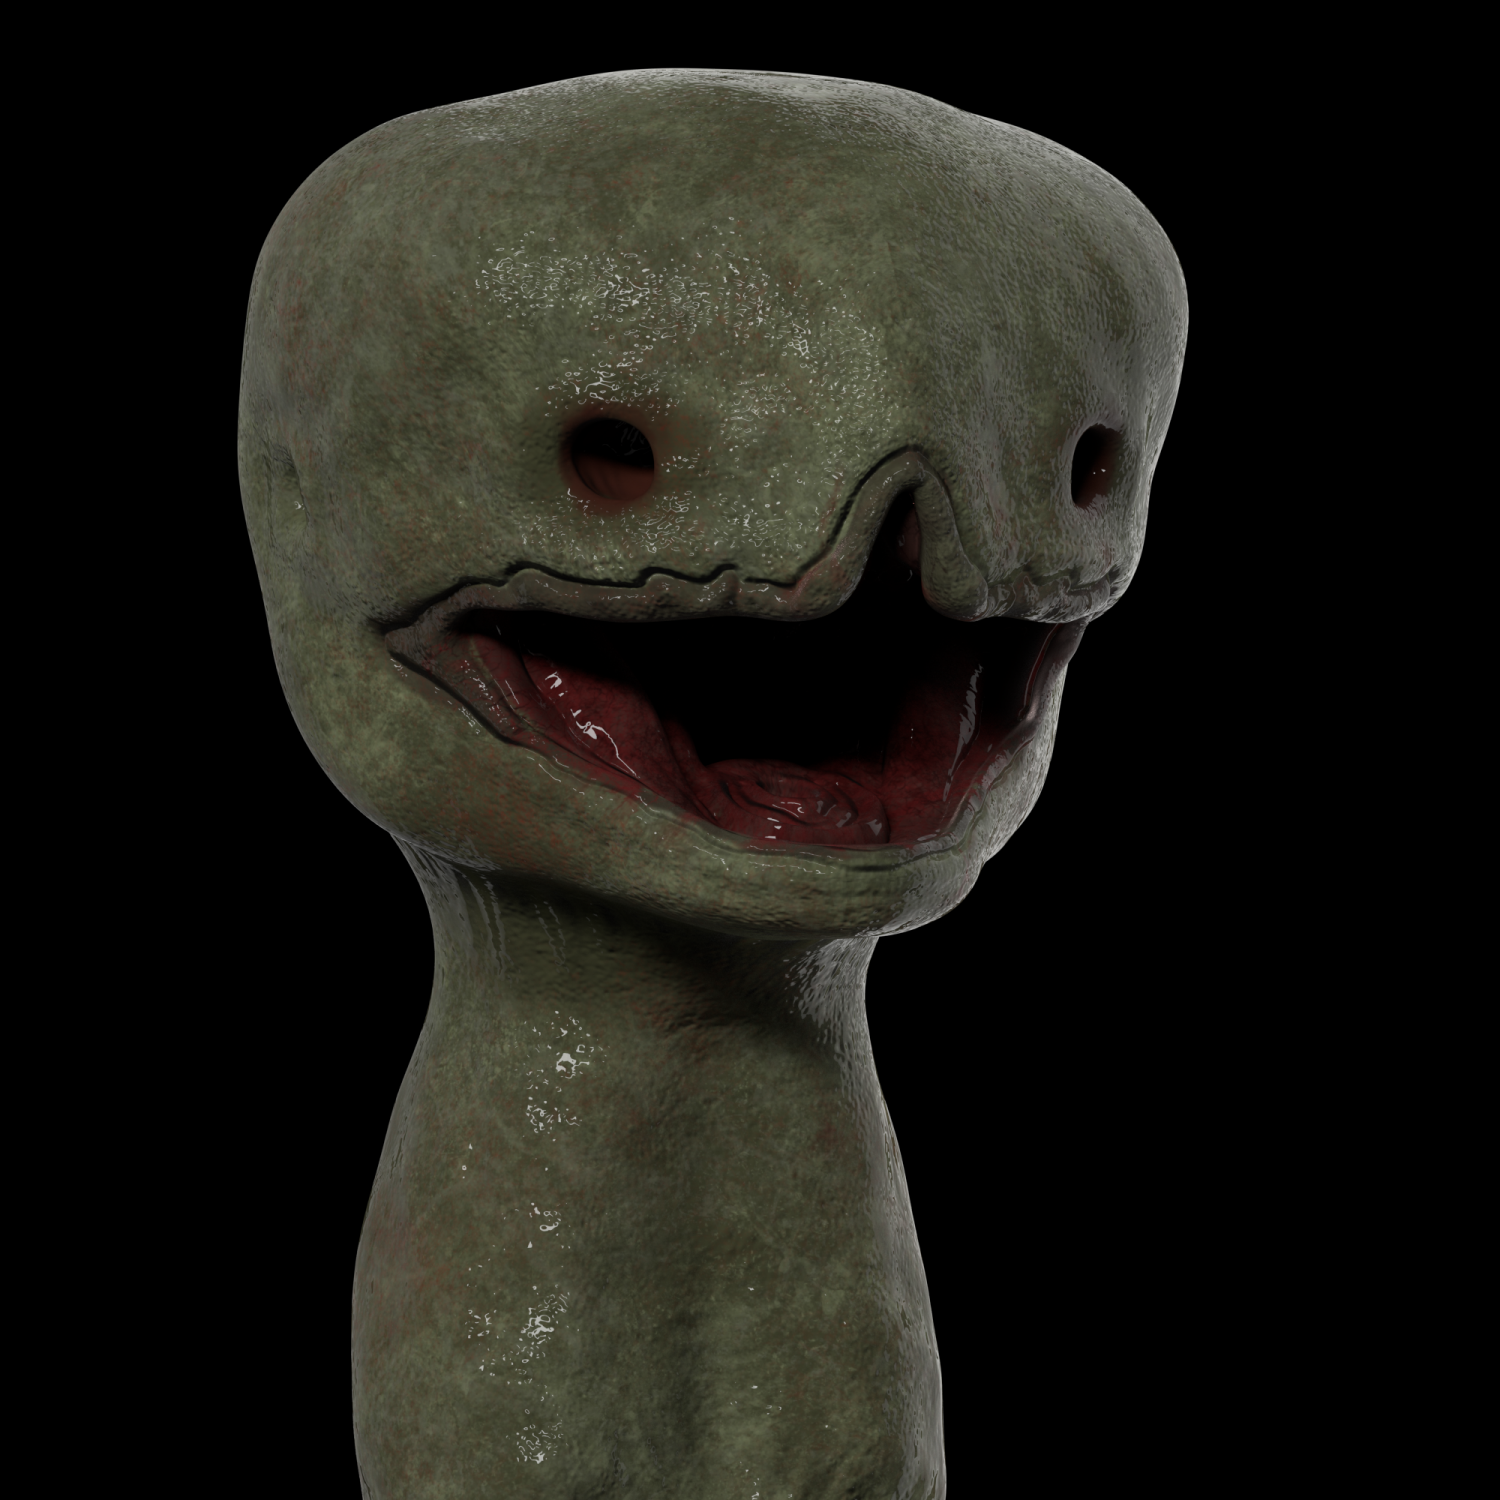 realistic creeper - minecraft Low-poly 3D Model